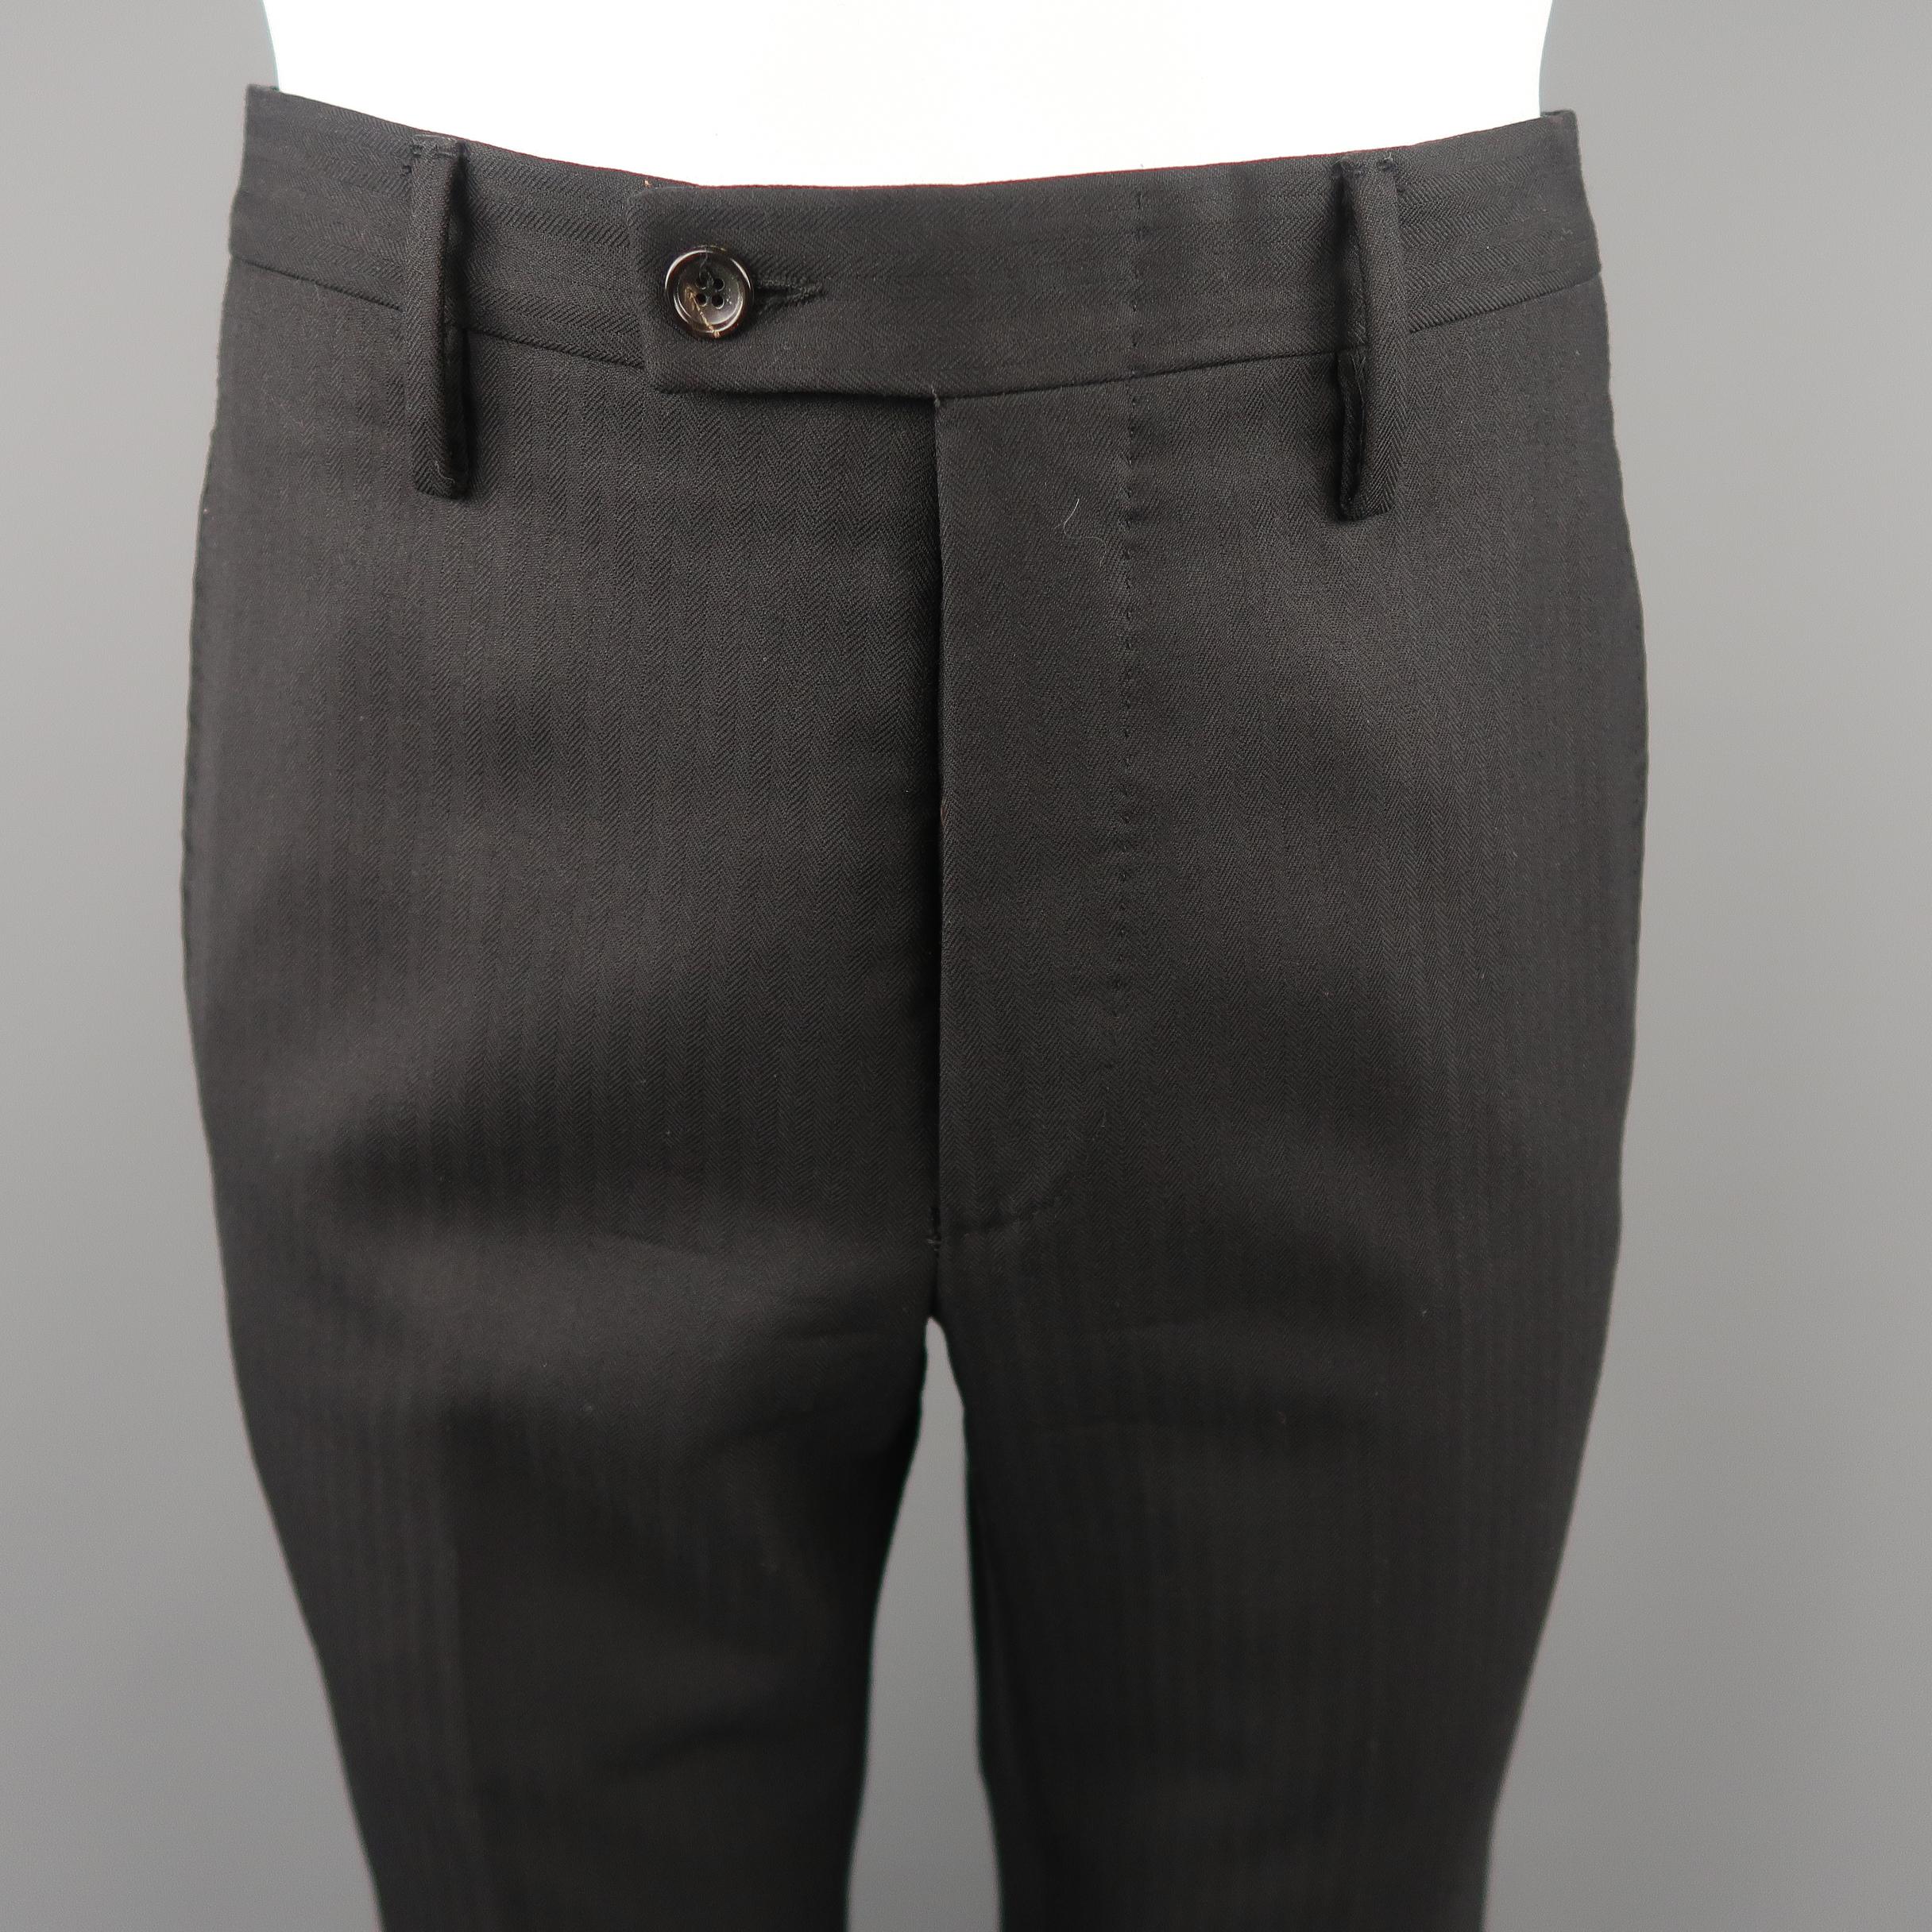 GUCCI flared dress pants come in black tone in herringbone wool material, with seam and slit pockets and button fly. 

Made in Italy. 
Excellent  Pre-Owned Condition.
Marked: 46 R  IT
 
Measurements:
 
Waist:  30  in.
Rise: 10.5  in.
Inseam:  35  in.